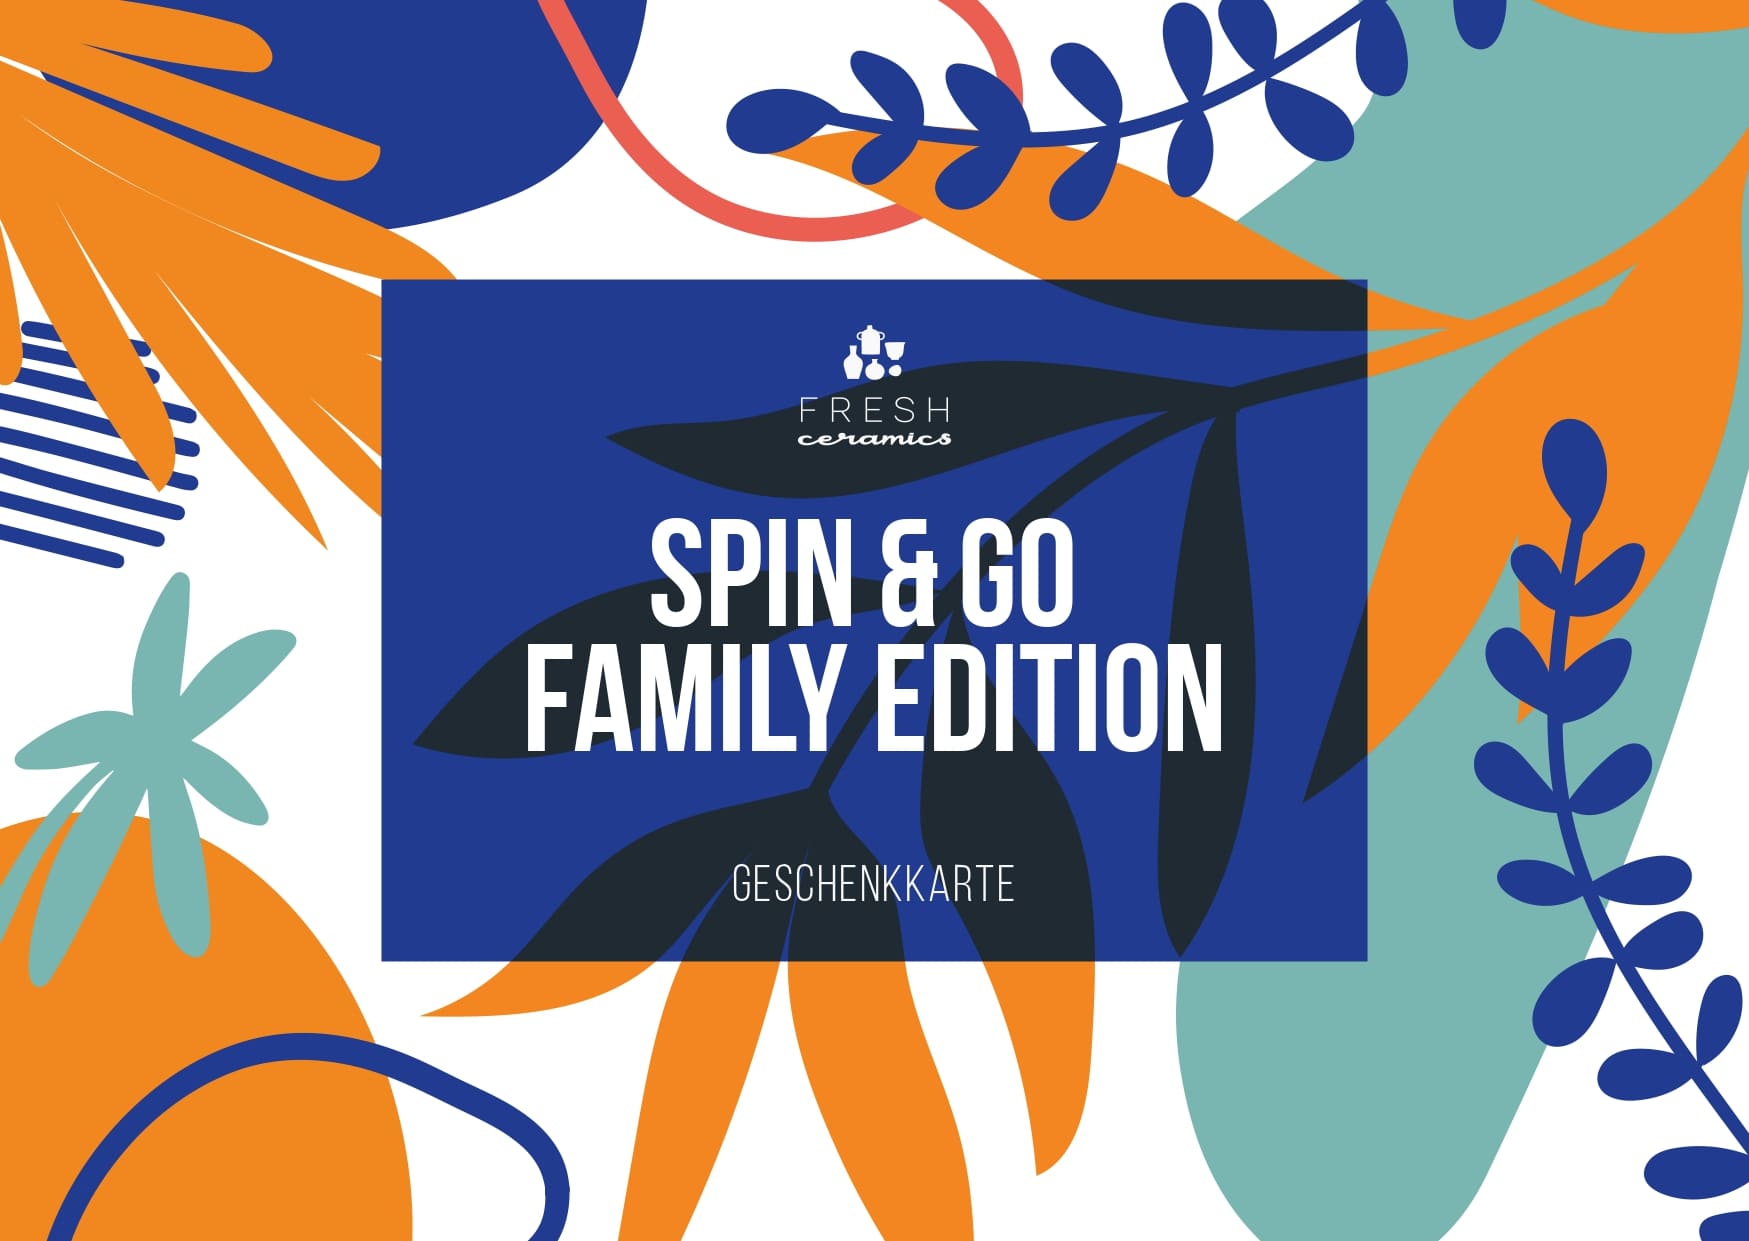 Spin & Go Family Edition